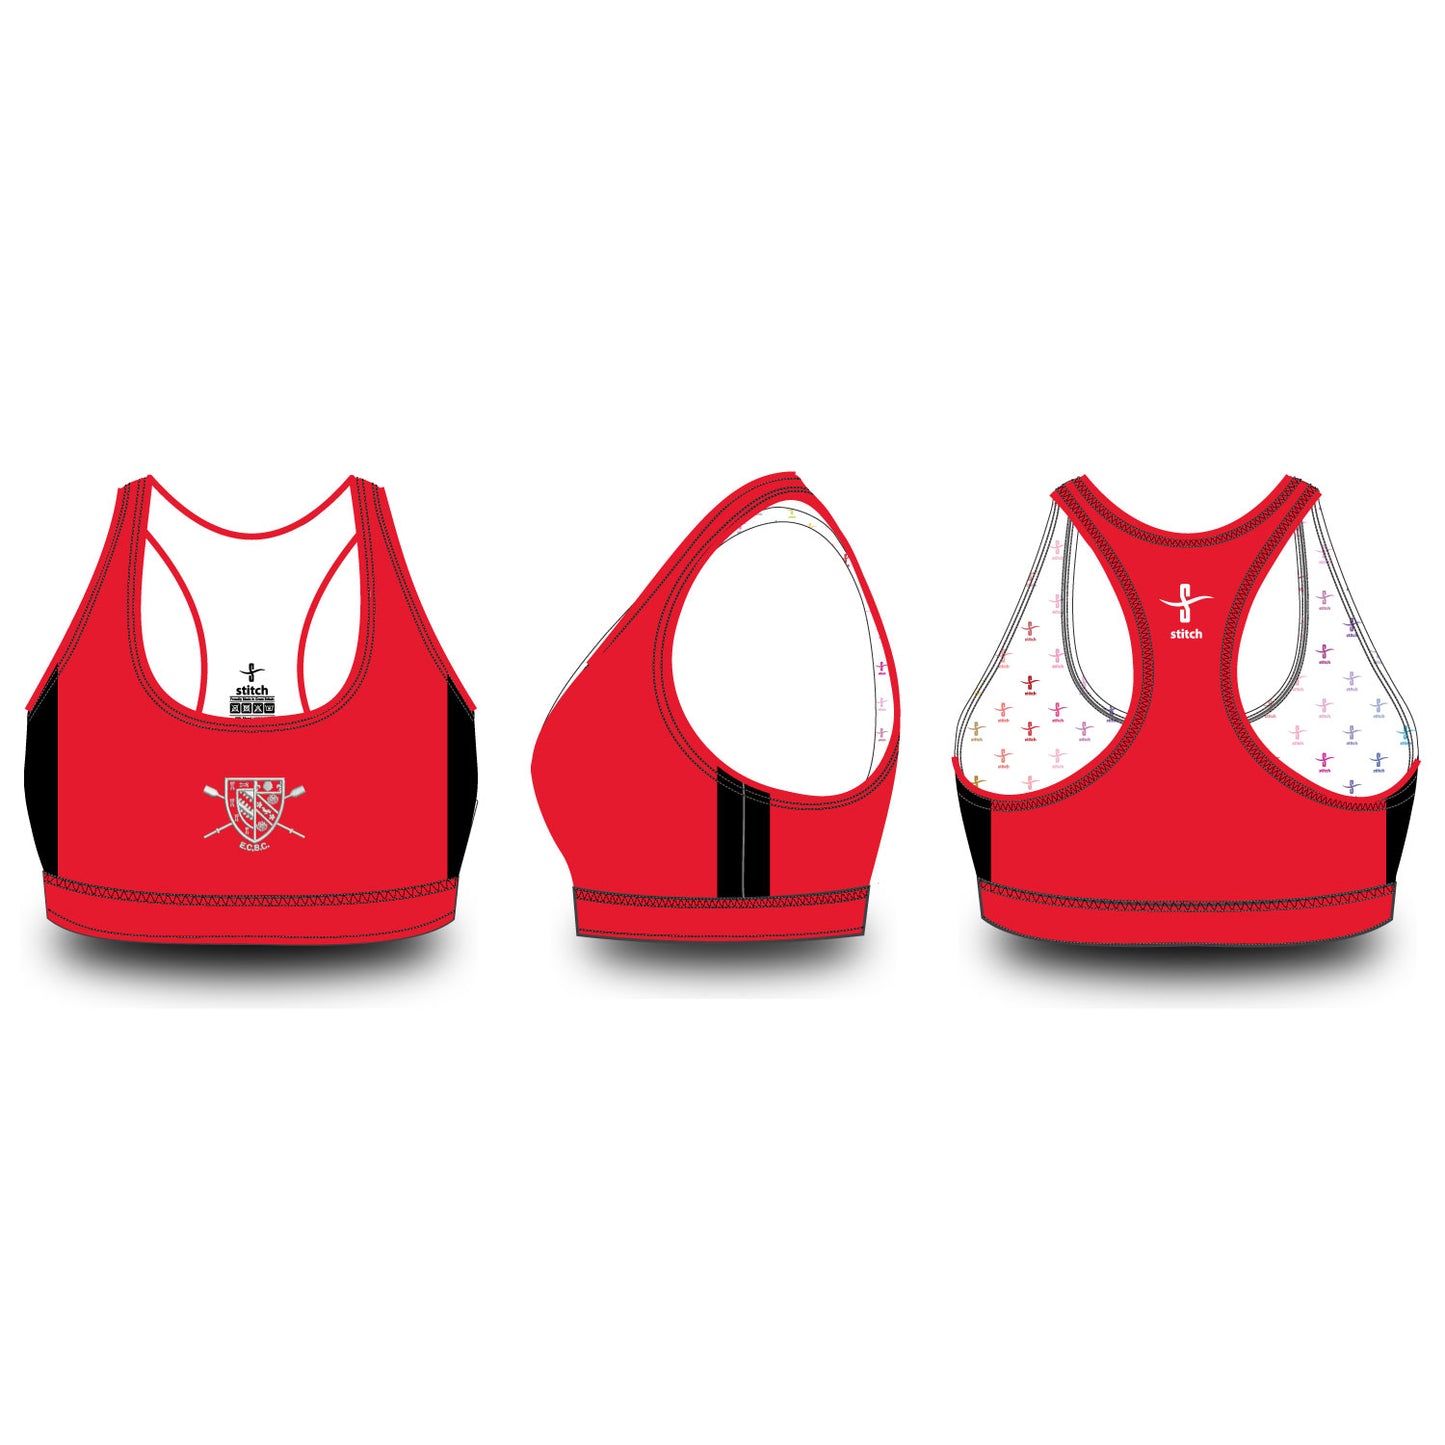 Exeter College Boat Club Sports Bra